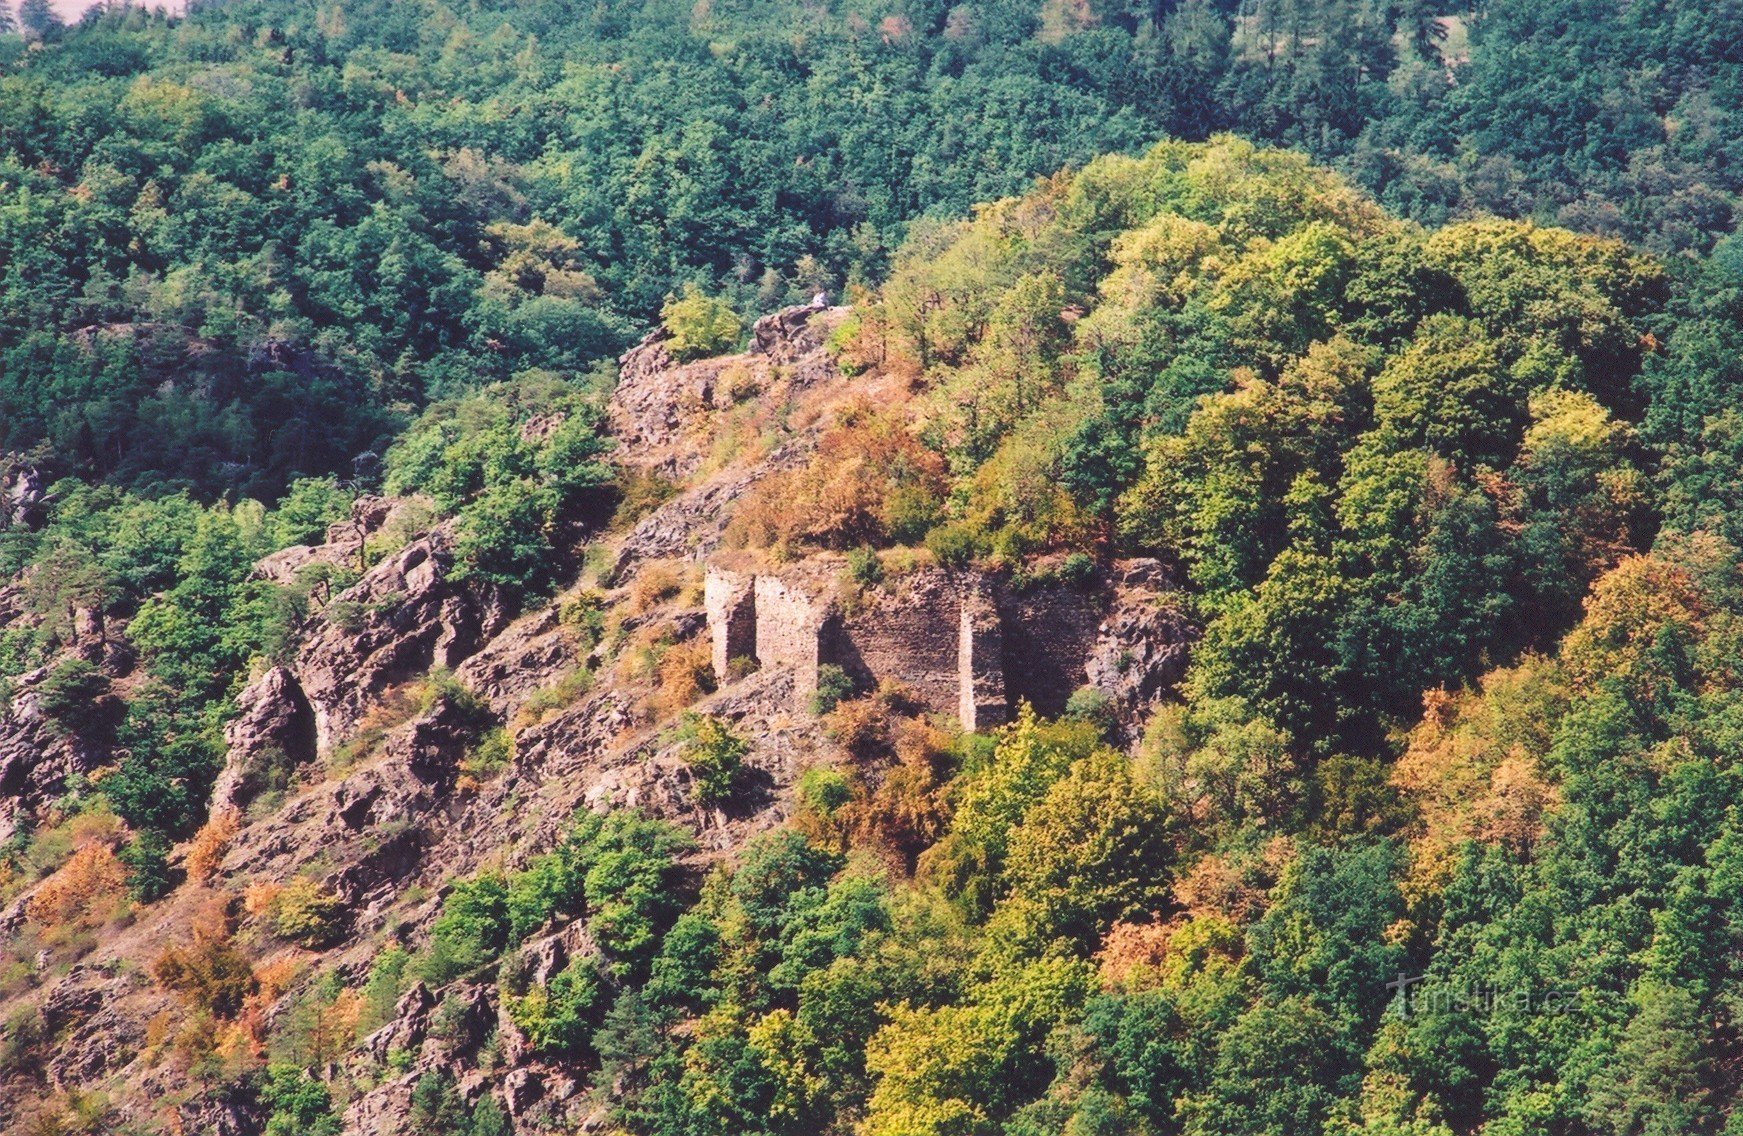 View of the ruins of Levnov Castle